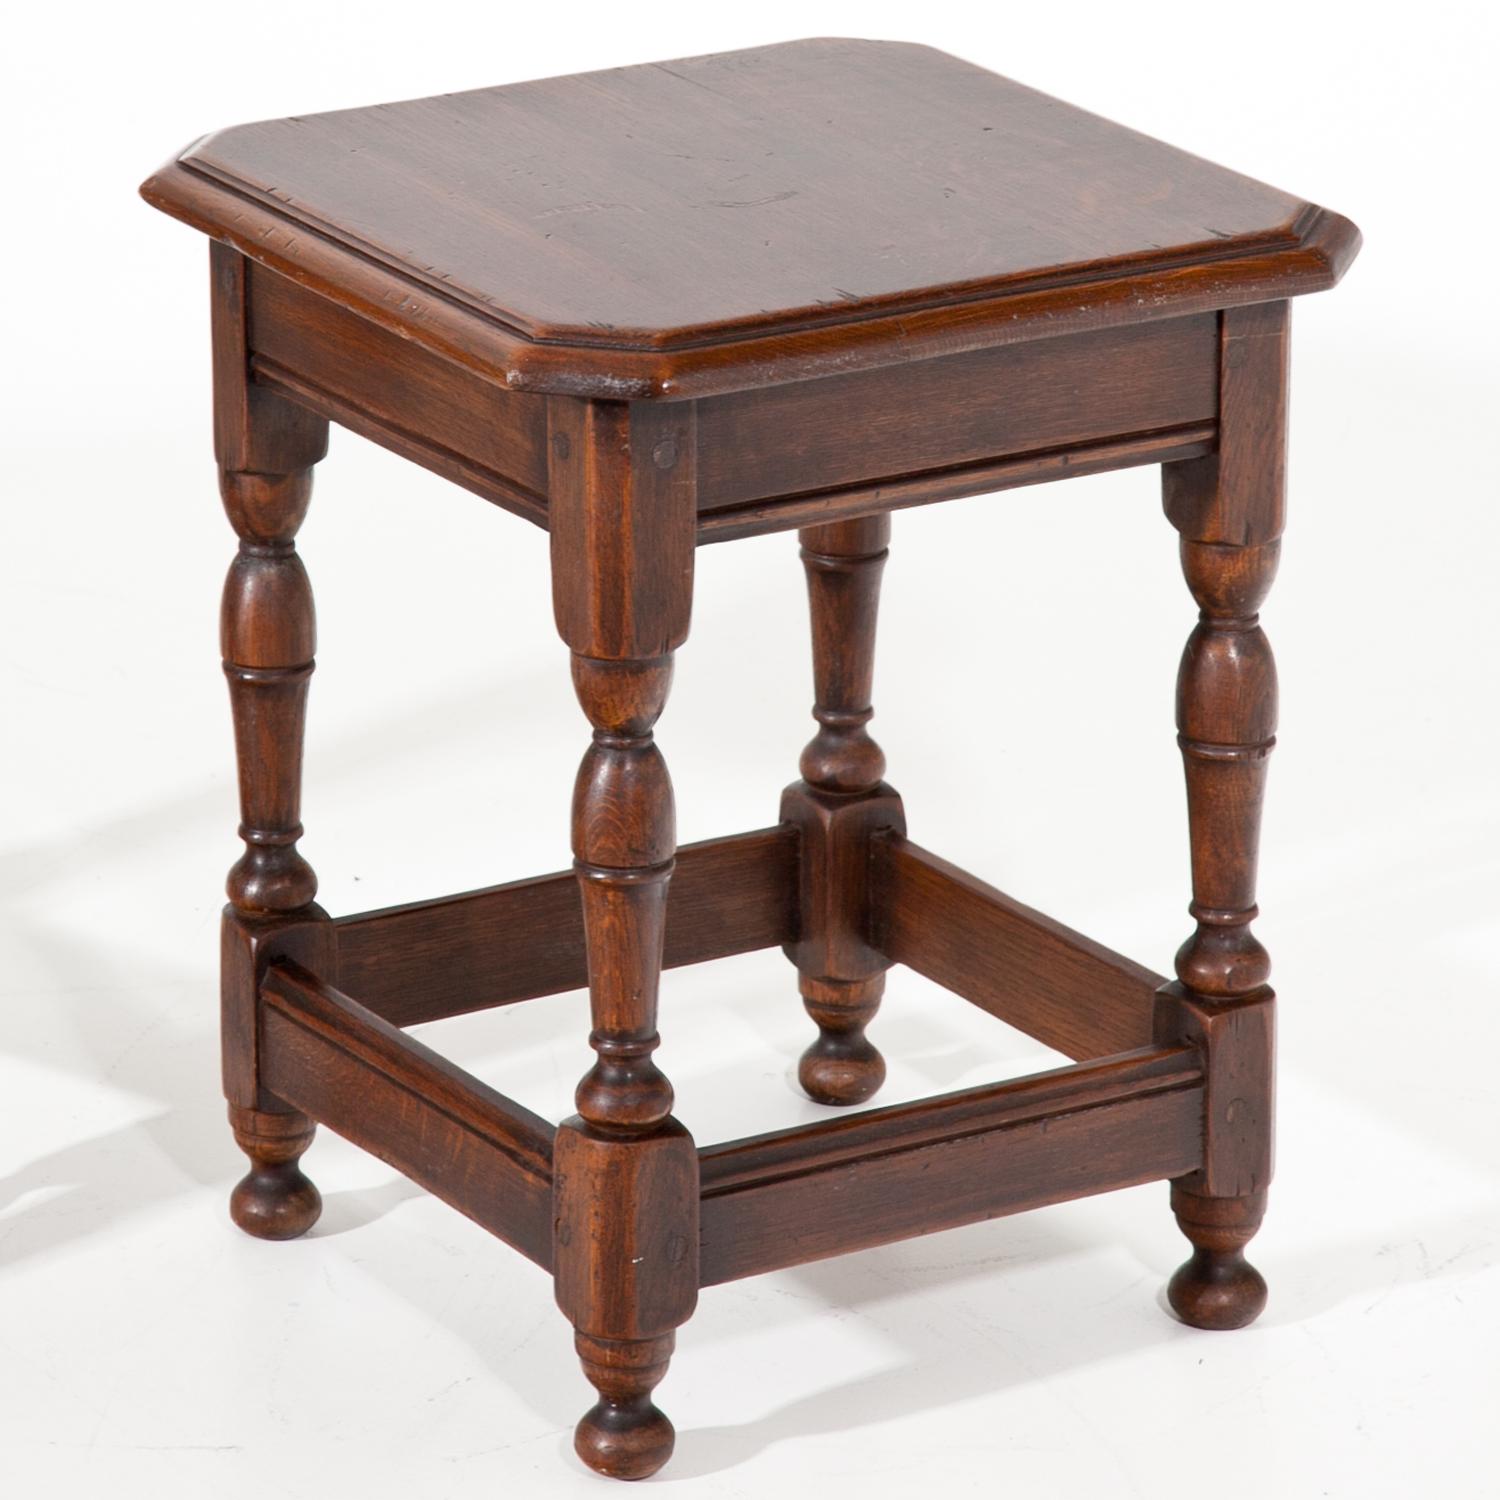 Pair of low side tables out of solid oak, standing on baluster legs with octagonal seats.